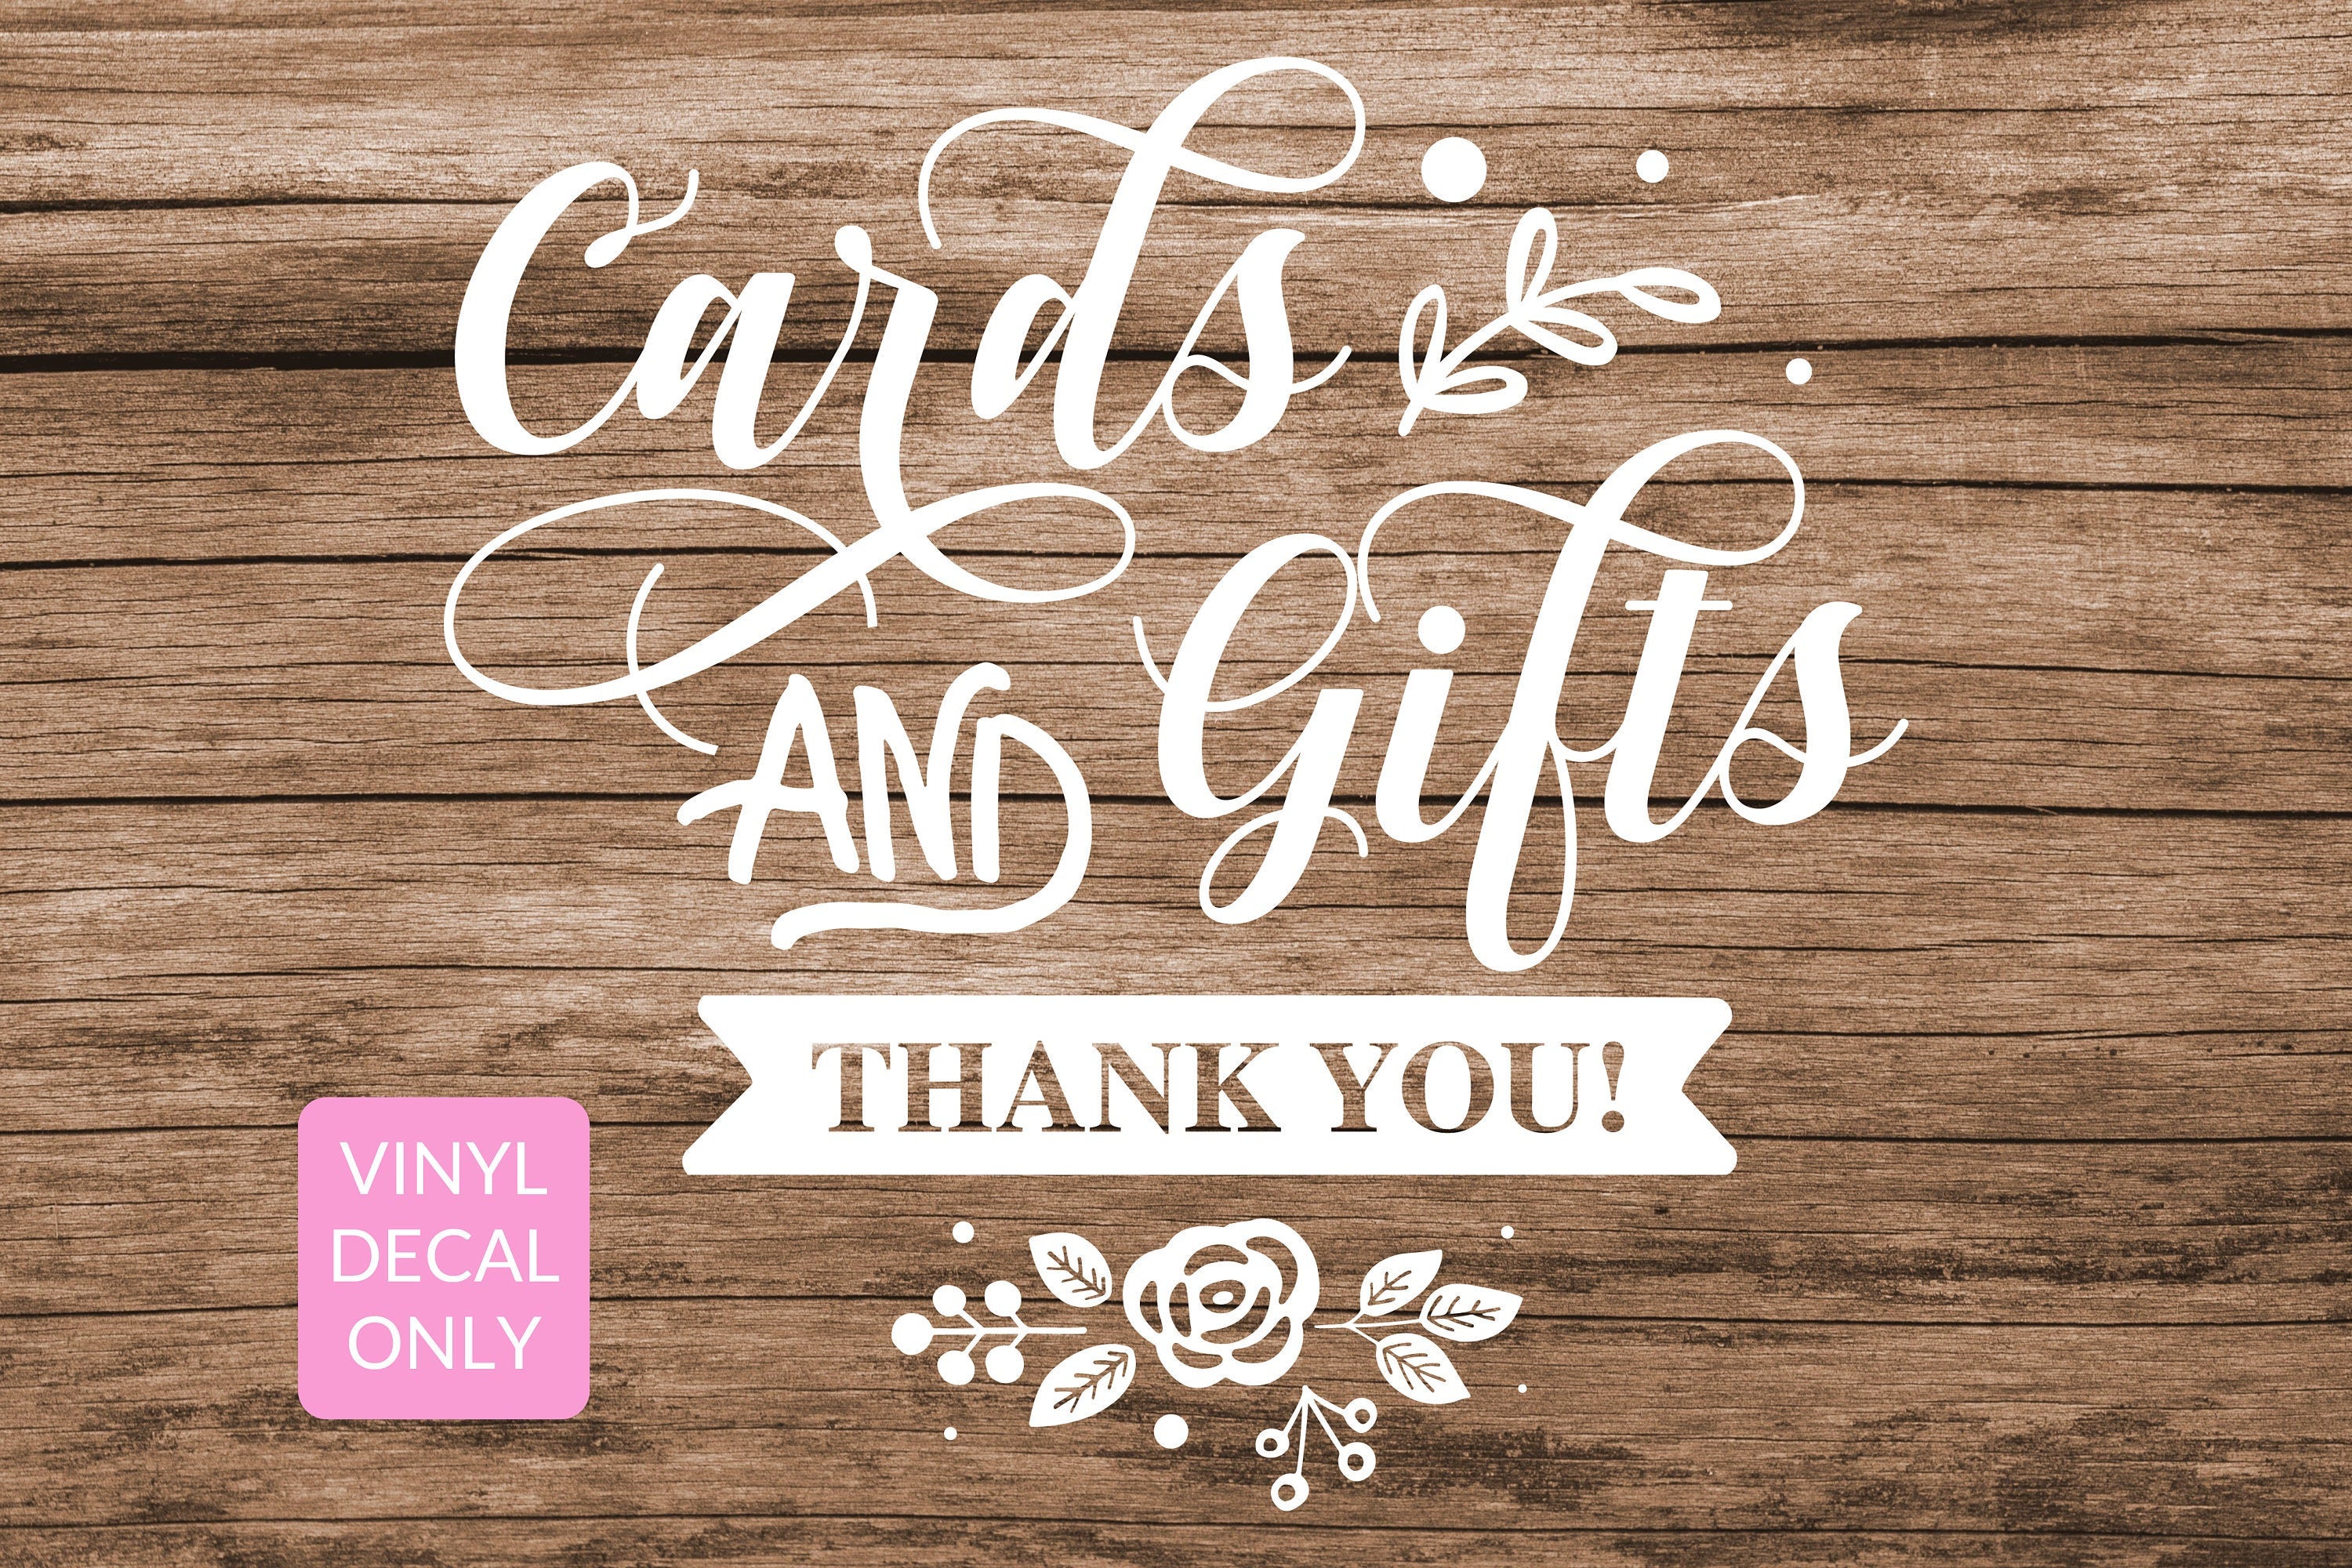 Cards and Gifts Vinyl Decal for DIY Wedding Ceremony & Reception, Event, Party Signs, for Wood, Metal, Glass, Walls, Doors